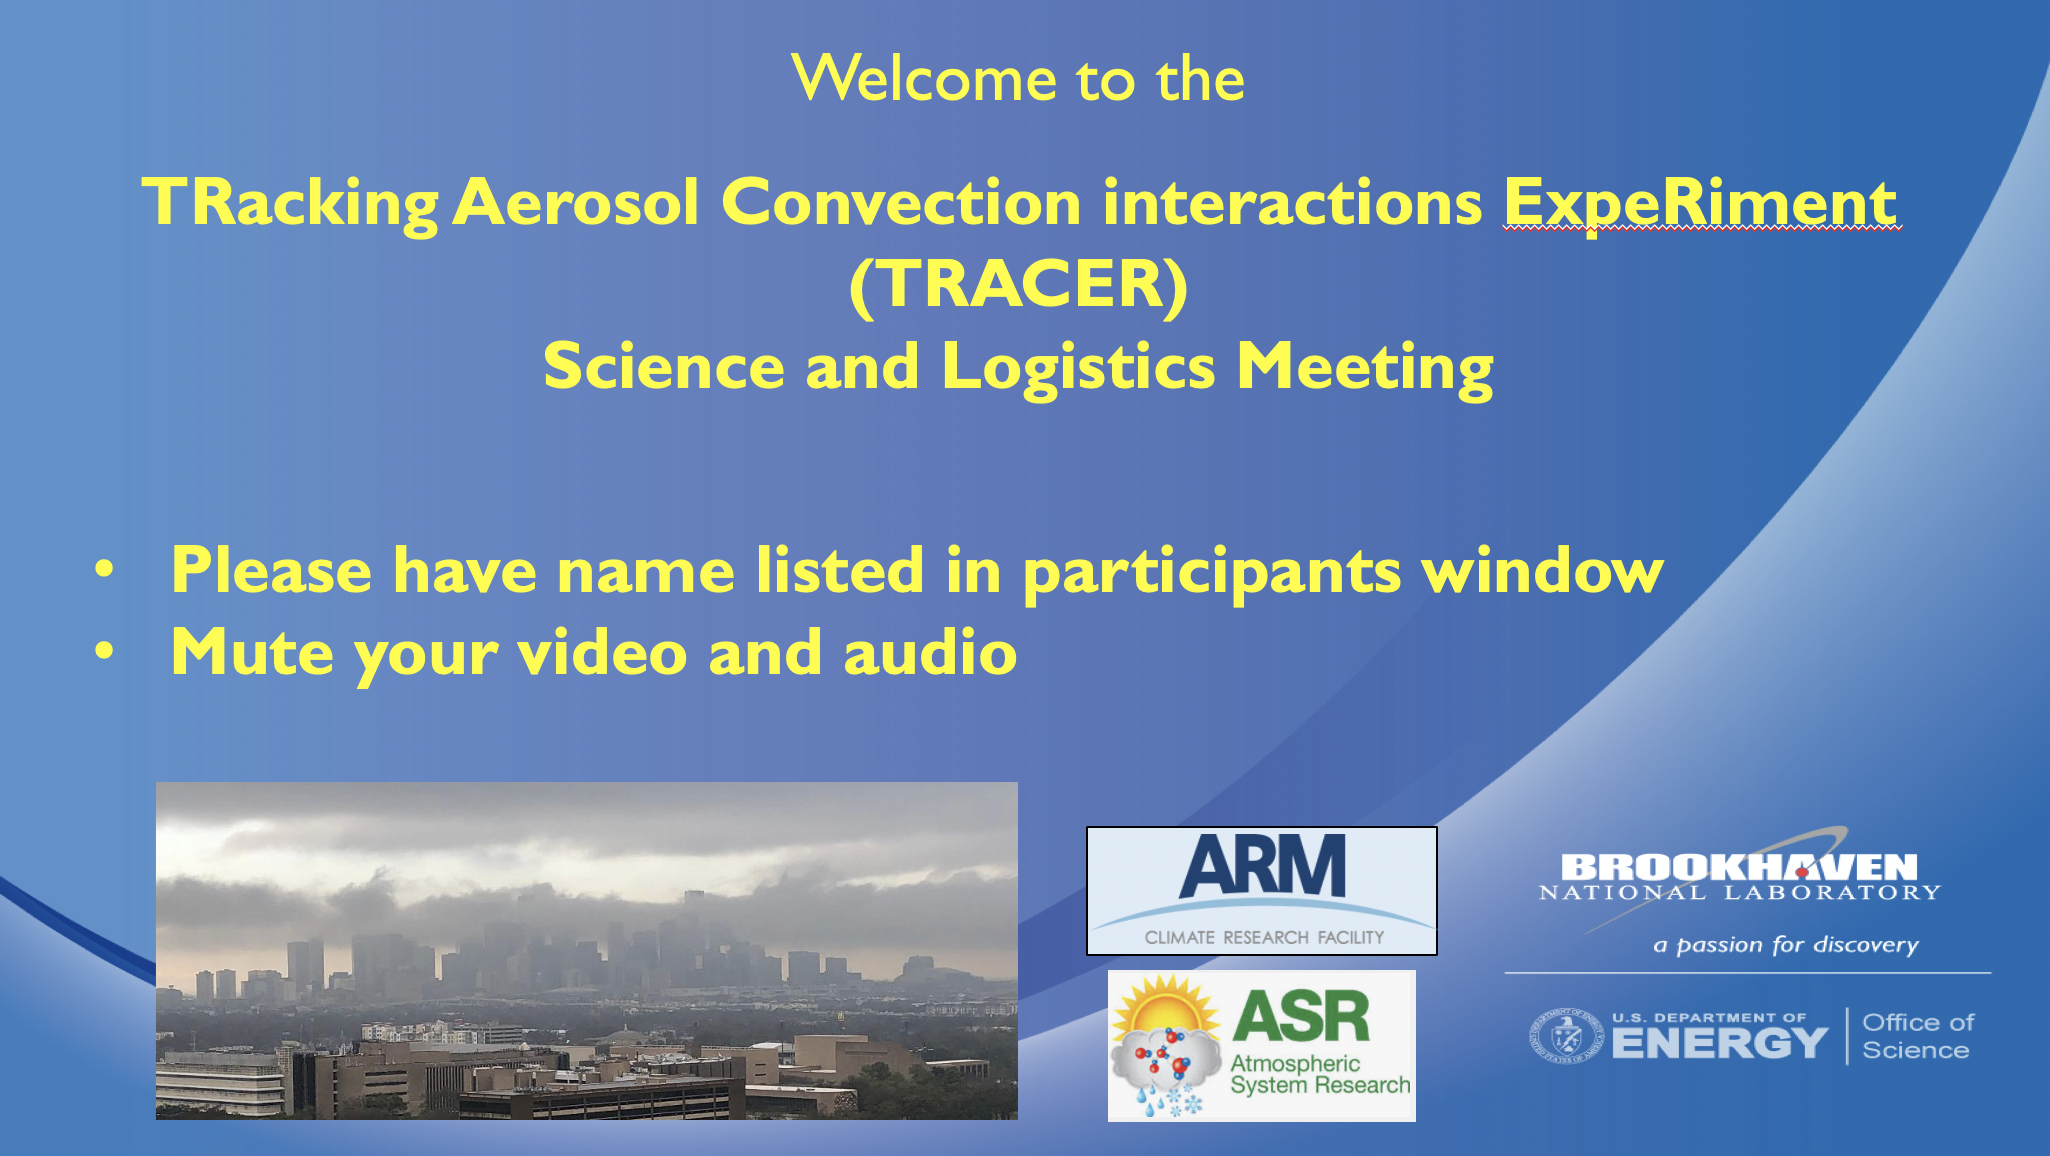 Welcome slide for TRACER science and logistics meeting